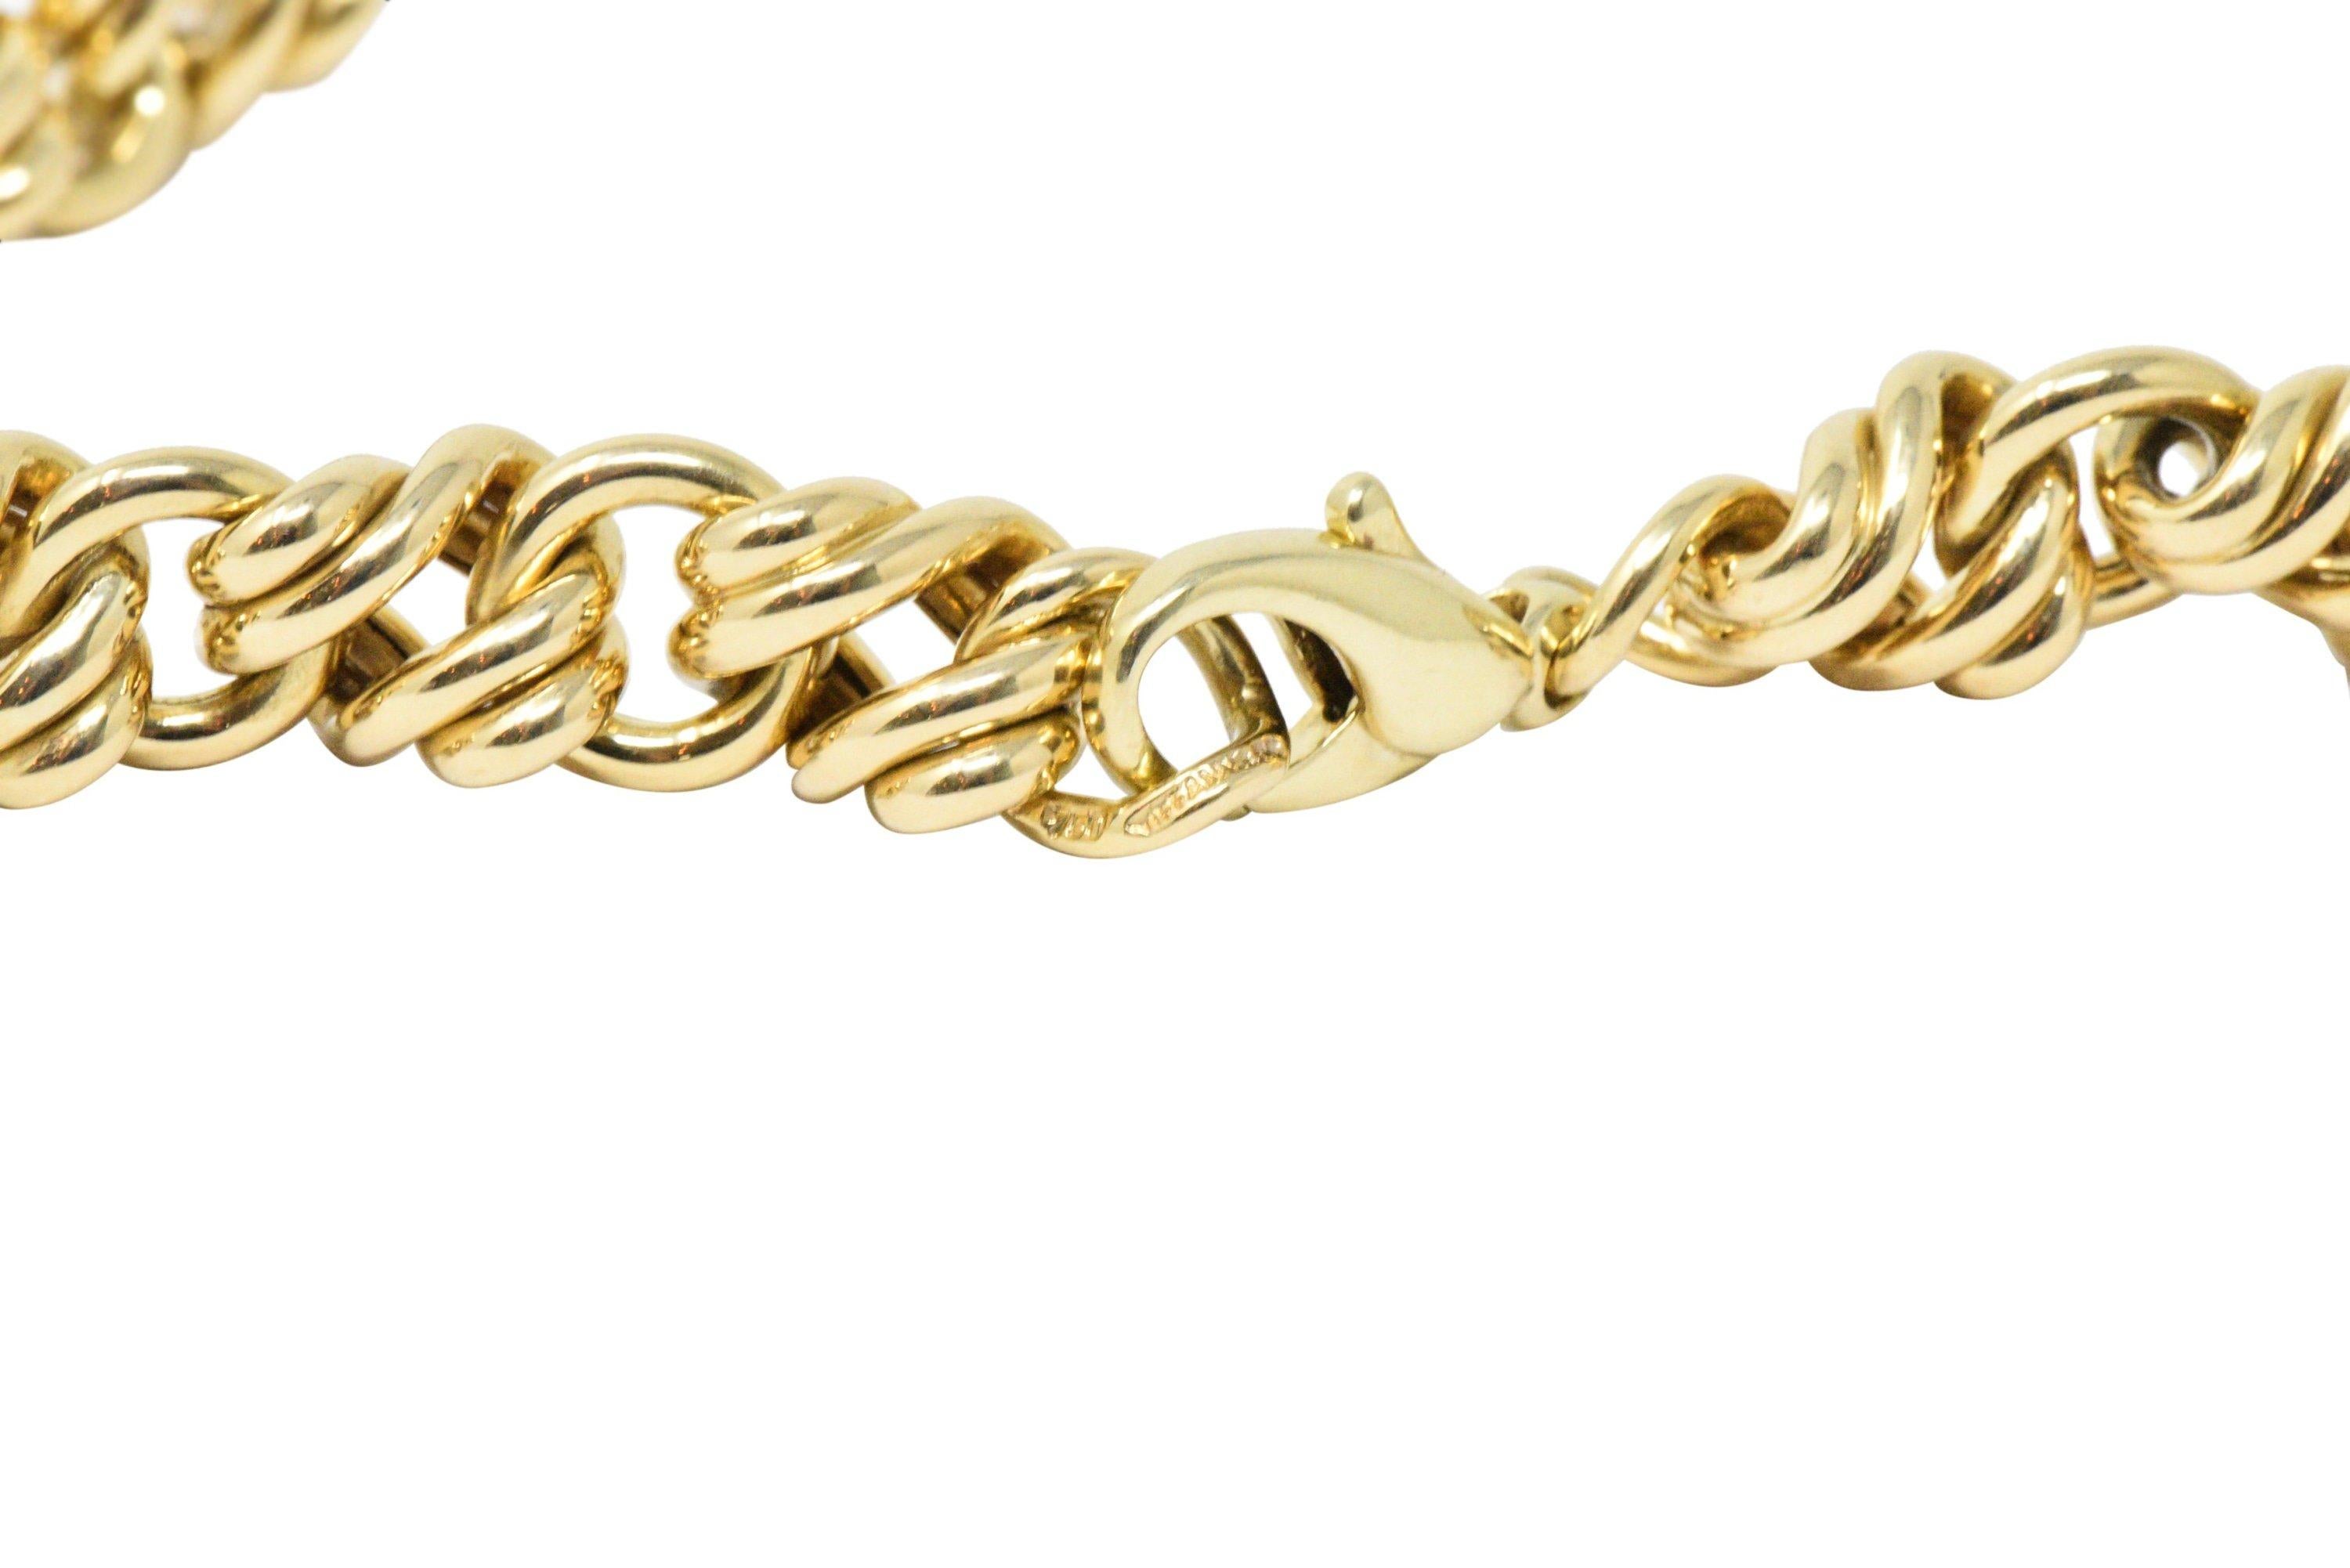 Modern Sophisticated Tiffany & Co. 18 Karat Gold Twisted Link Collar Necklace